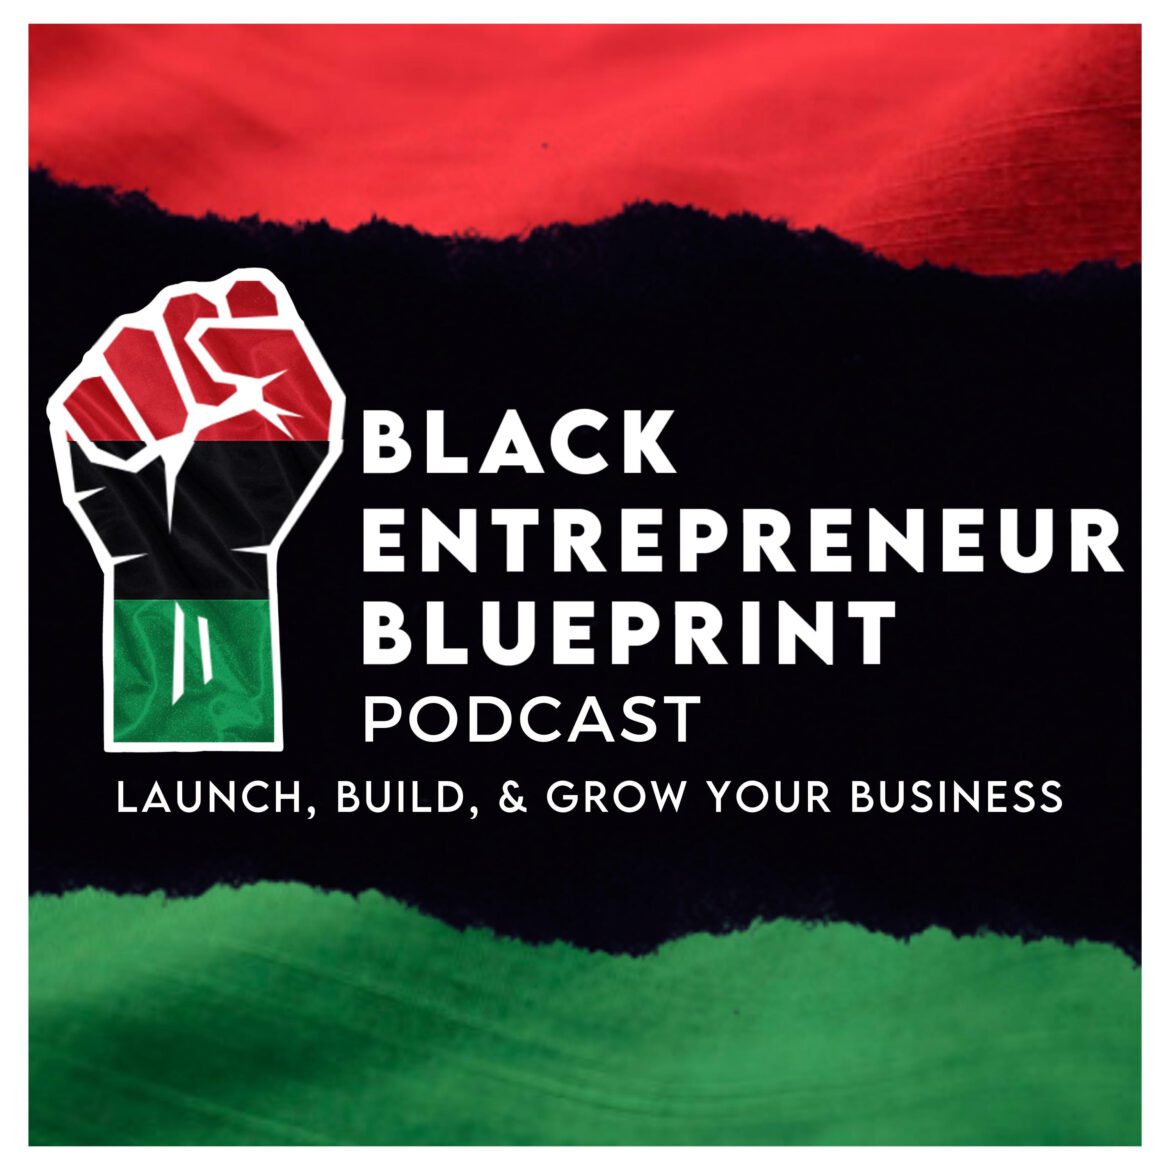 Black Podcasting - Black Entrepreneur Blueprint 415 - Jay Jones - Three Tips To Help You Breakthrough When Your Business Is Struggling Or You Just Need To Make More Money